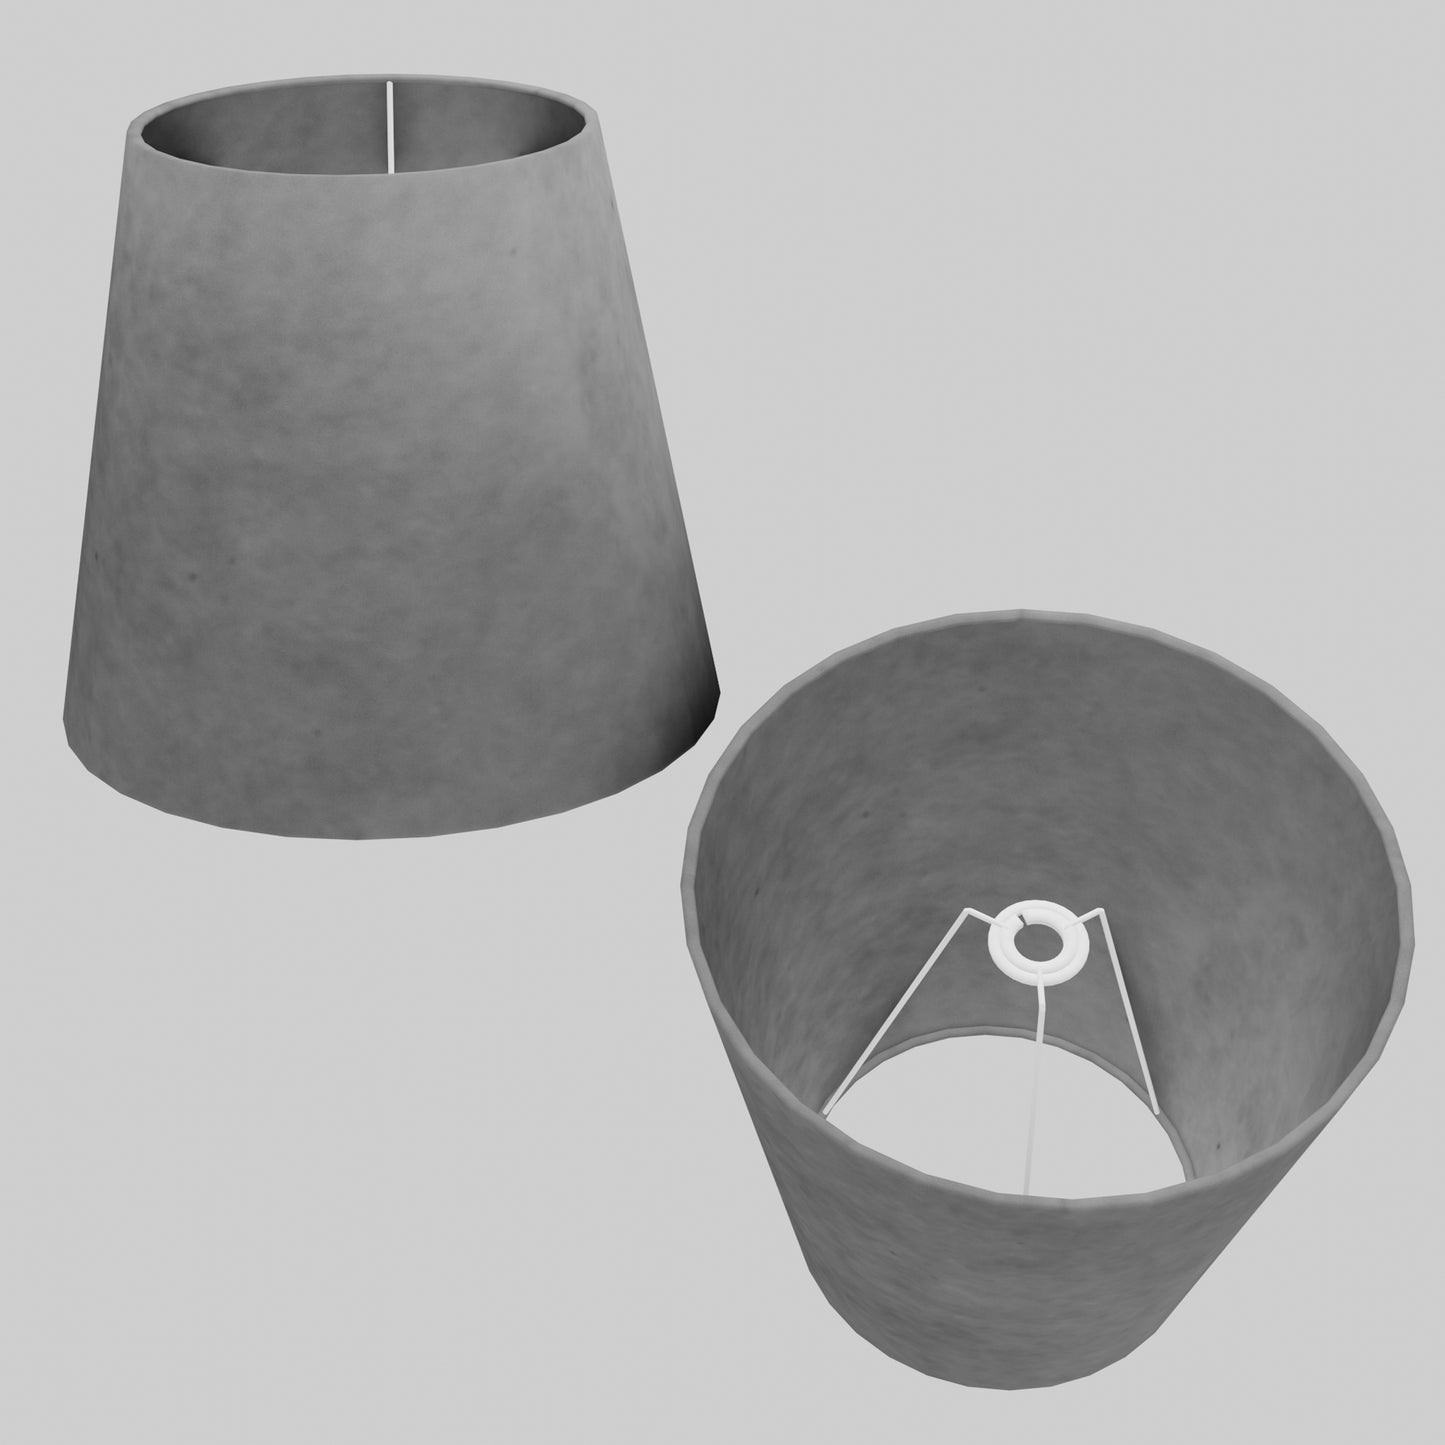 Conical Lamp Shade P53 - Pewter Grey, 23cm(top) x 35cm(bottom) x 31cm(height)